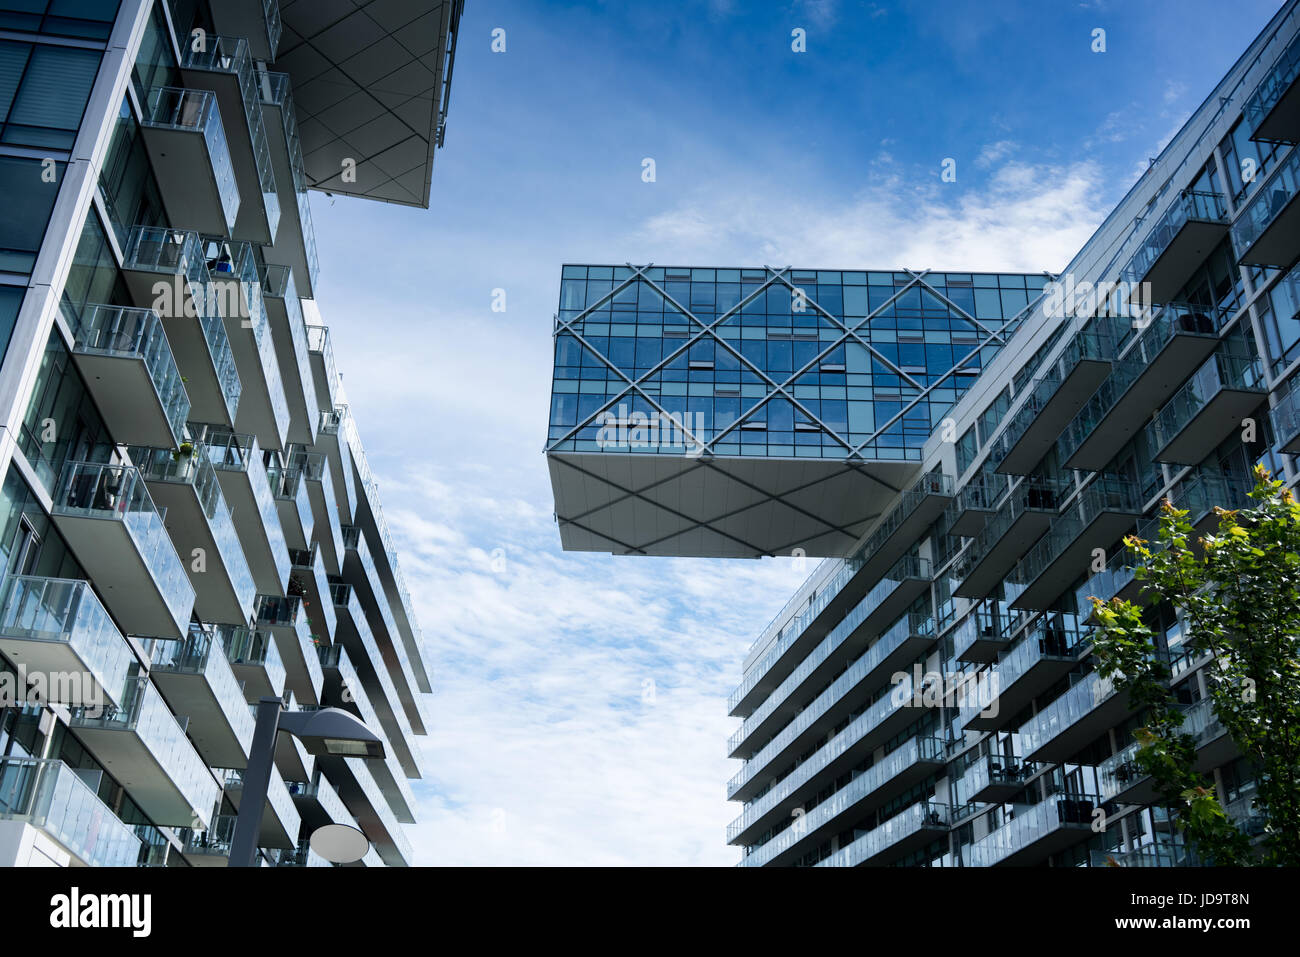 View of modern architecture in daylight with blue sky, low angle view, Ontario, Canada Stock Photo